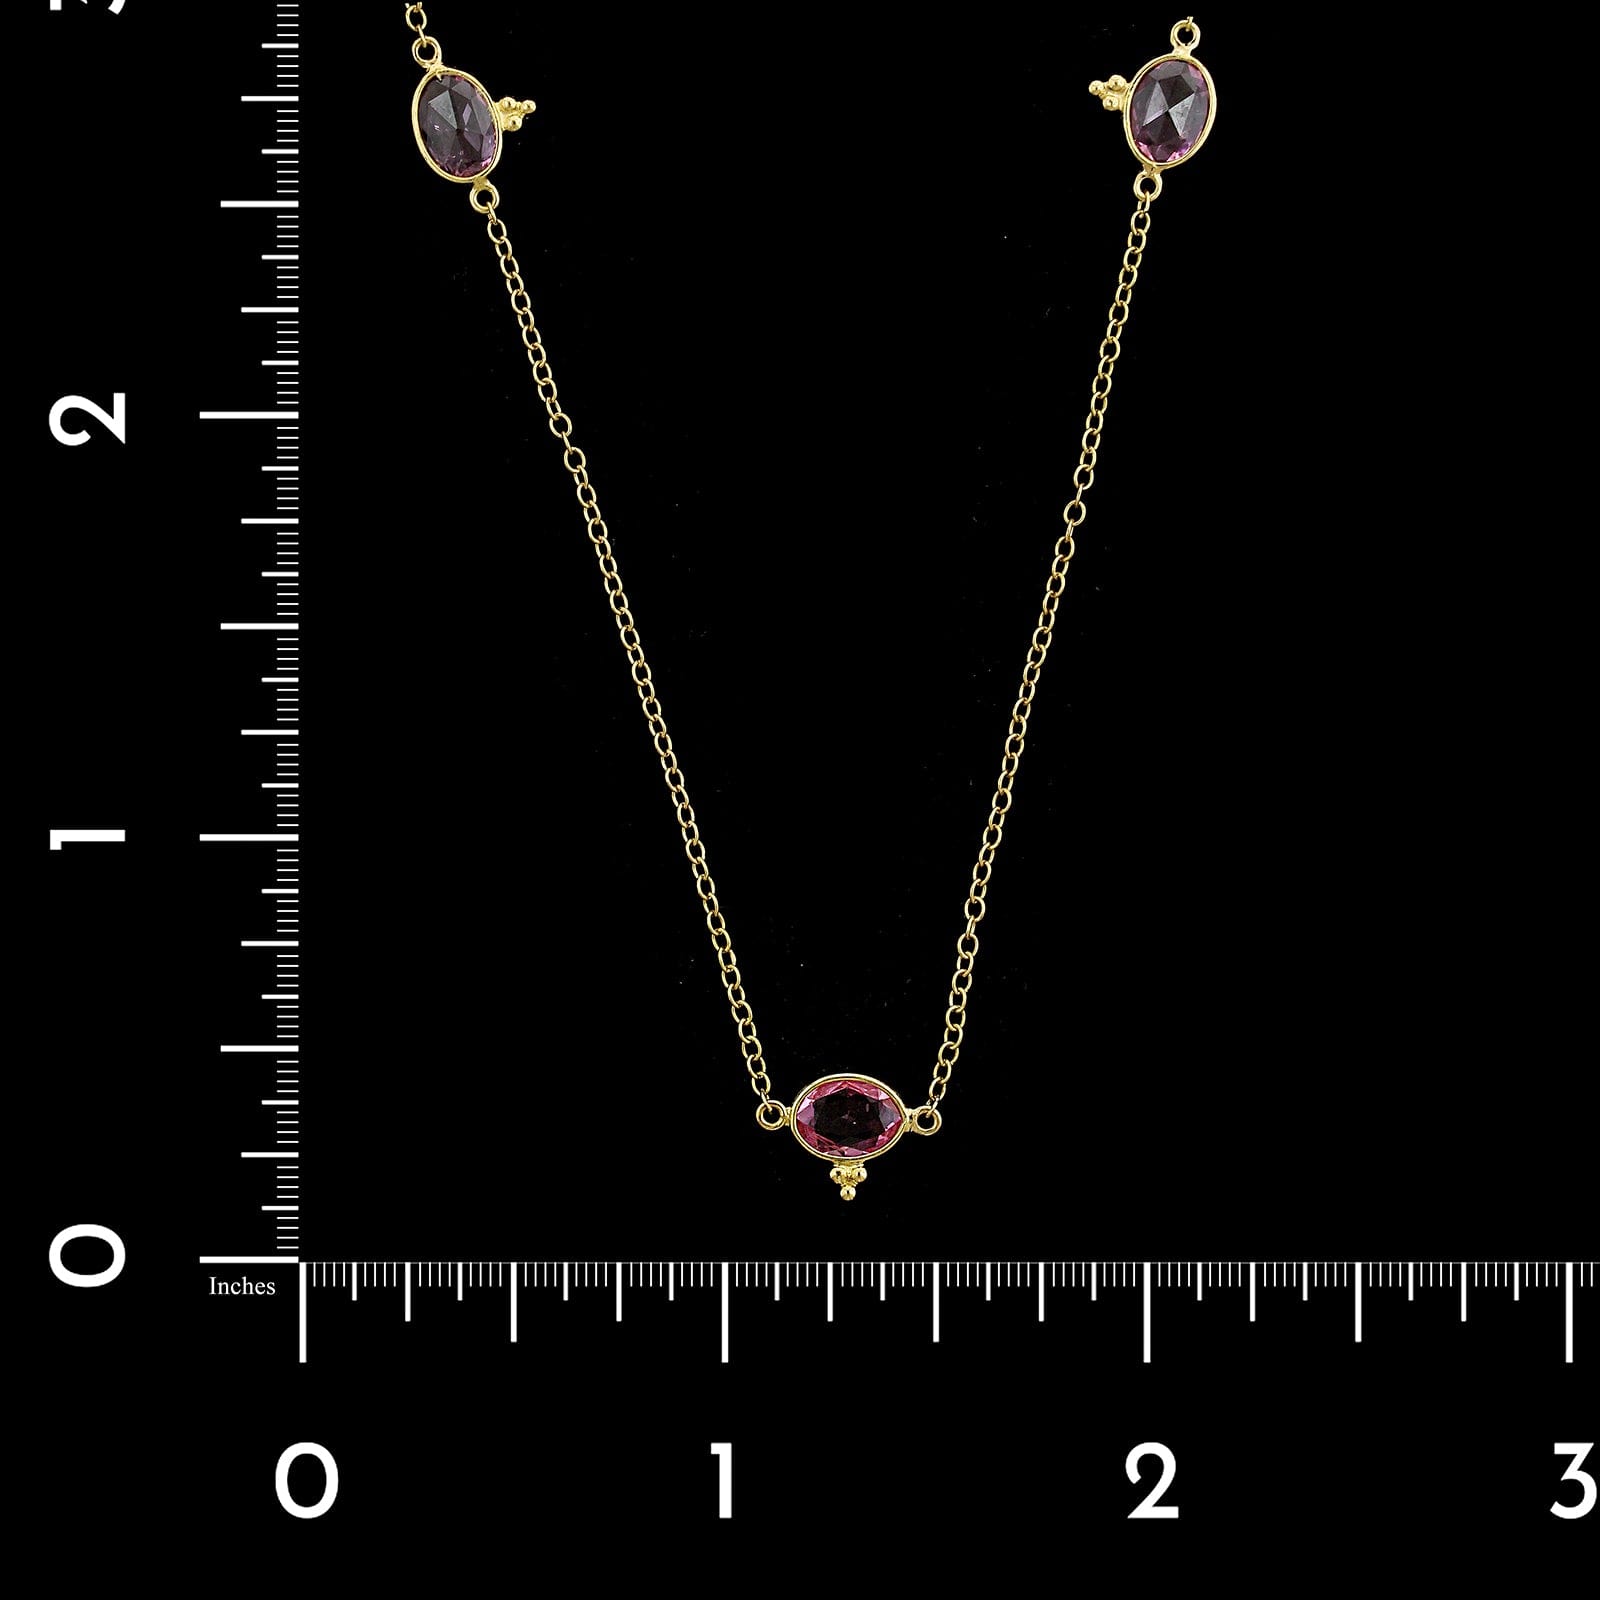 Temple St. Clair 18K Yellow Gold Estate Pink Sapphire Necklace